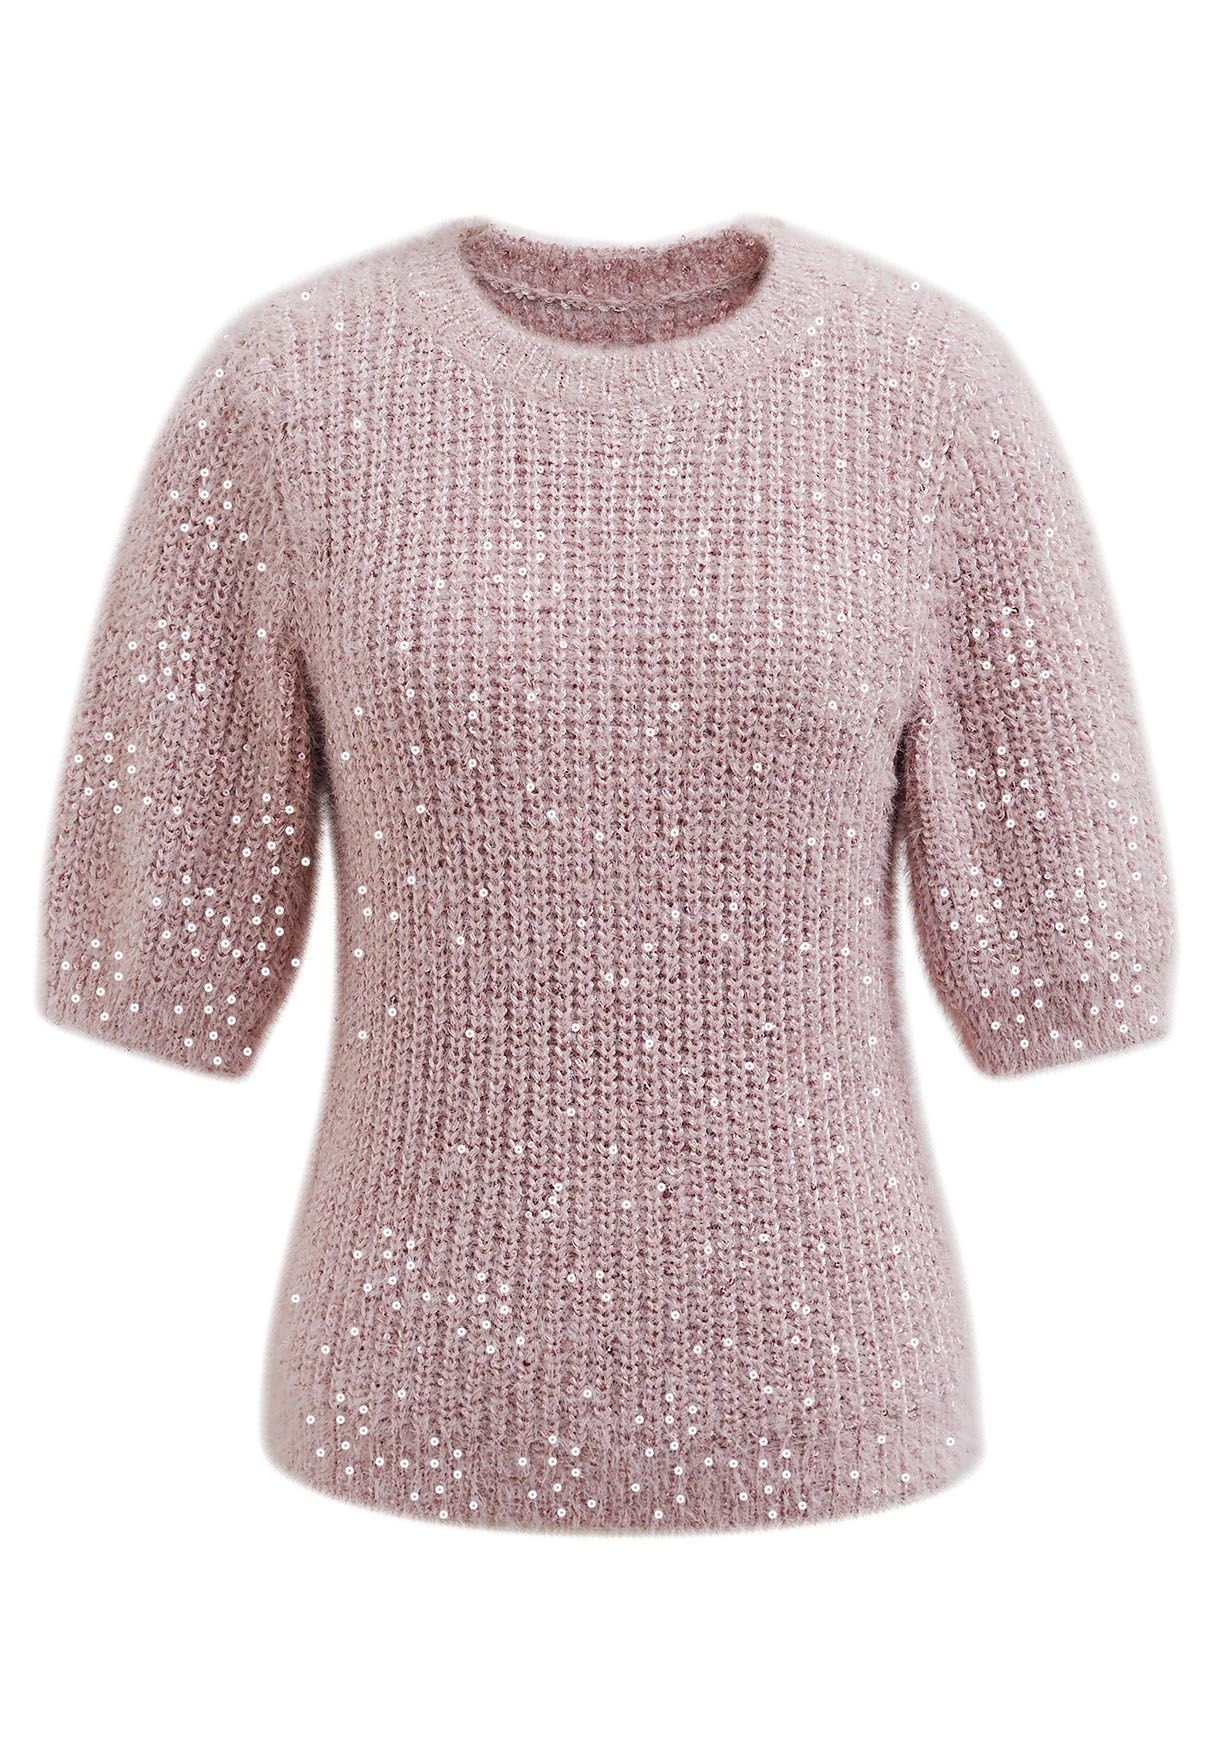 Sequin Fuzzy Short Sleeve Sweater in Pink | Chicwish